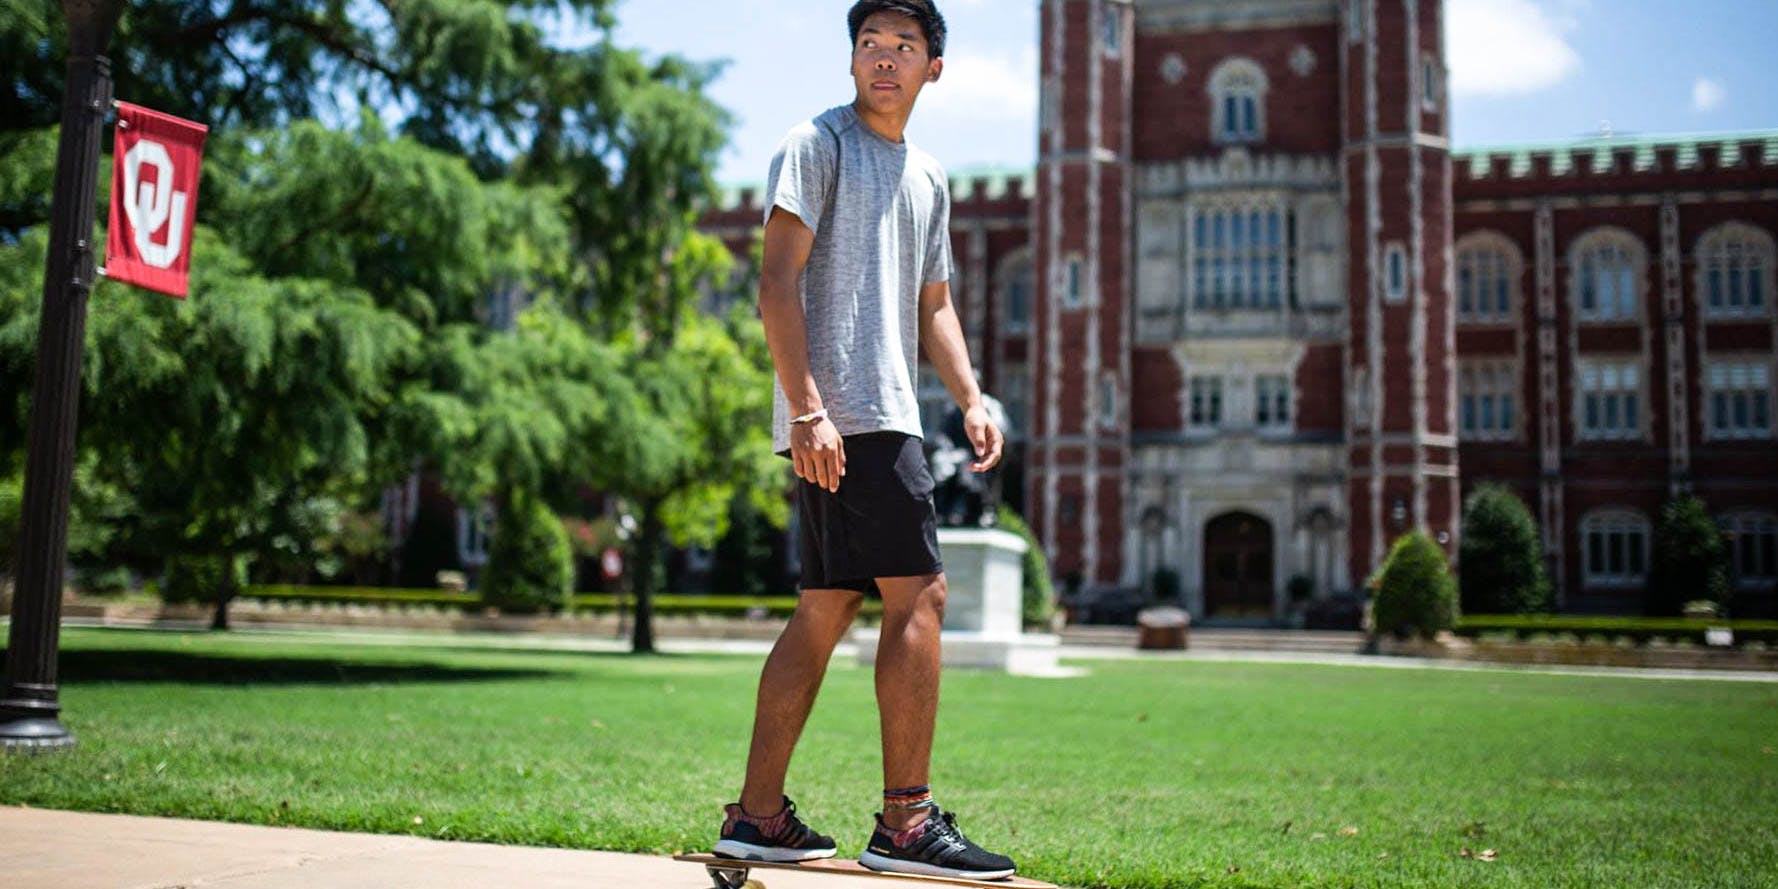 Oklahoma's Biggest Universities Ban Medical Marijuana Use. Here , a student is shown skateboarding on campus at the University of Oklahoma.